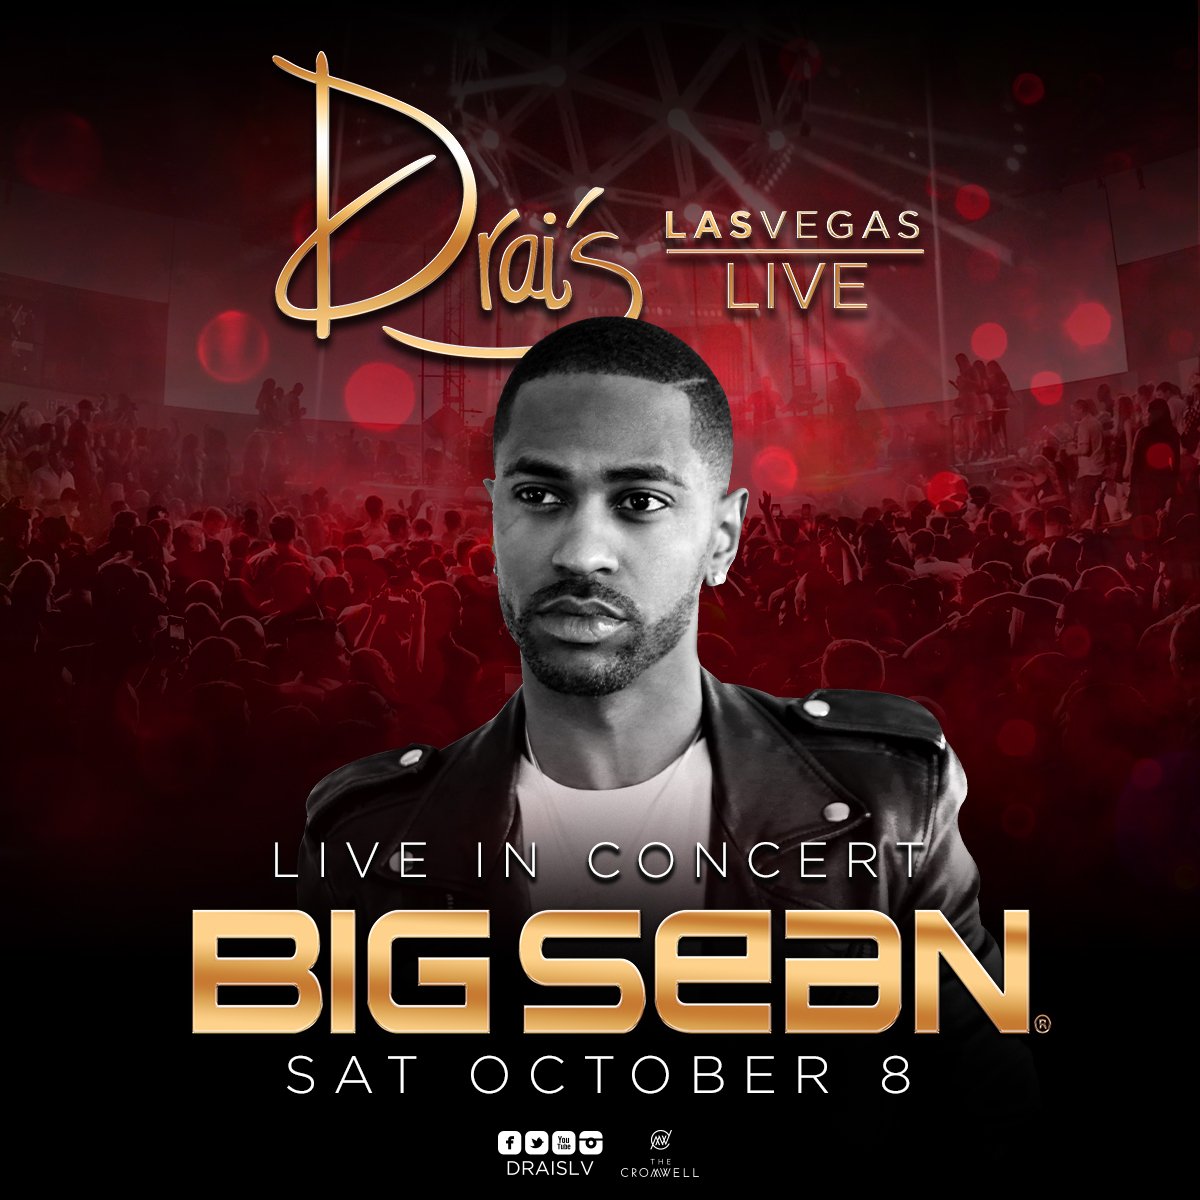 Vegas! We're back at #DraisLIVE inside @DraisLV this Saturday. Get your tix at: bit.ly/bigsean108 https://t.co/SiefYGPp9I